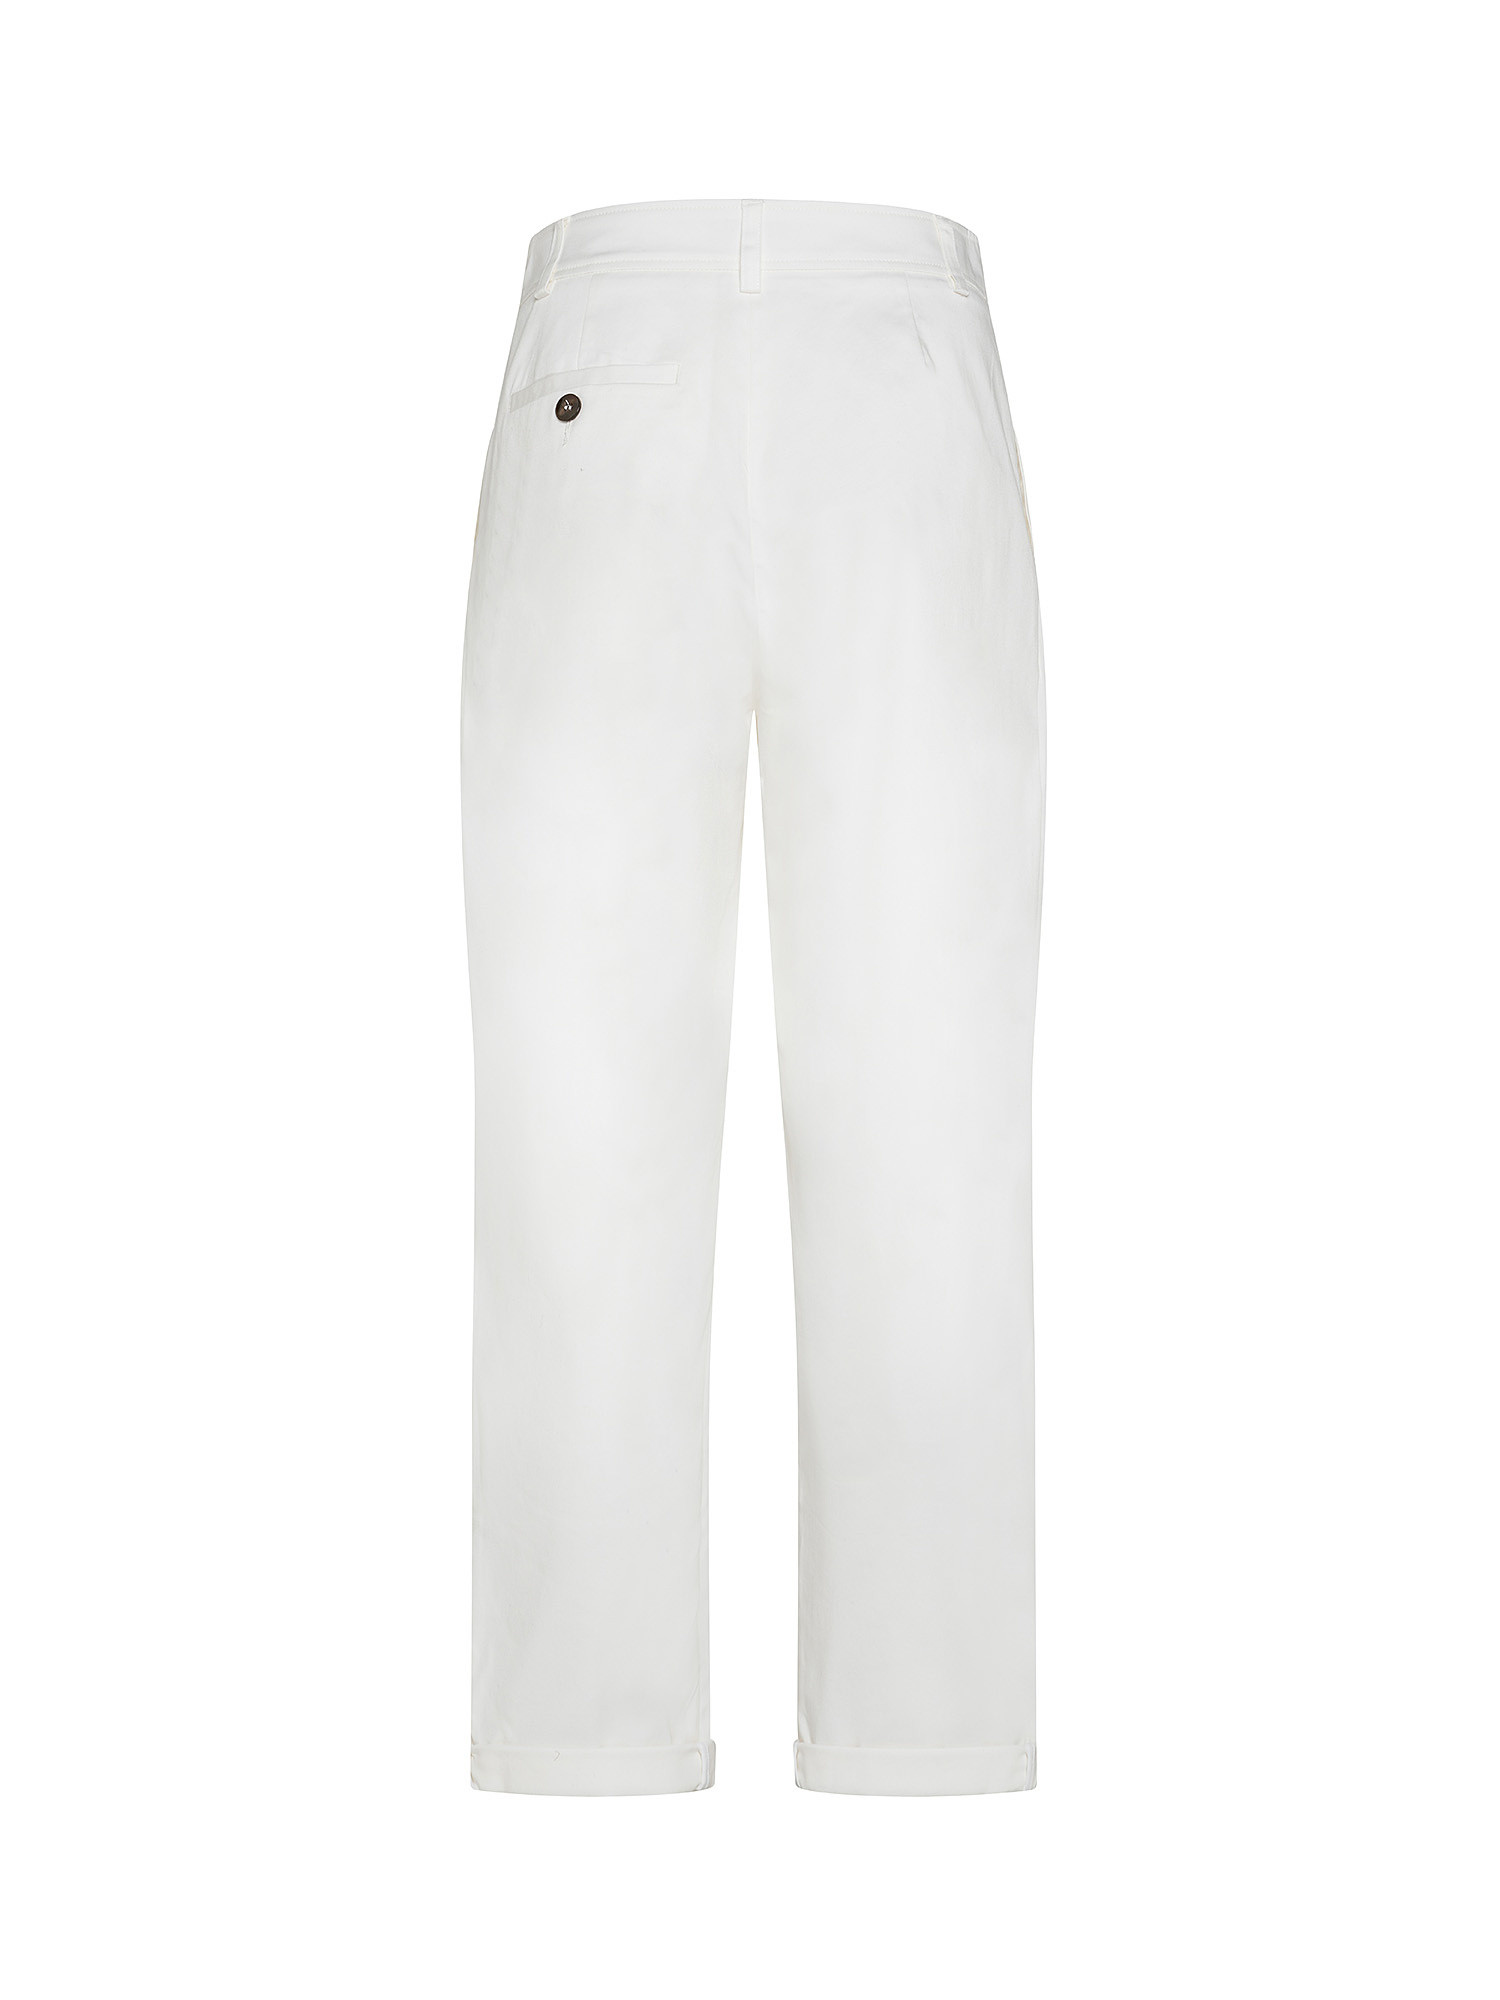 Anderson trousers in stretch cotton gabardine, White, large image number 1